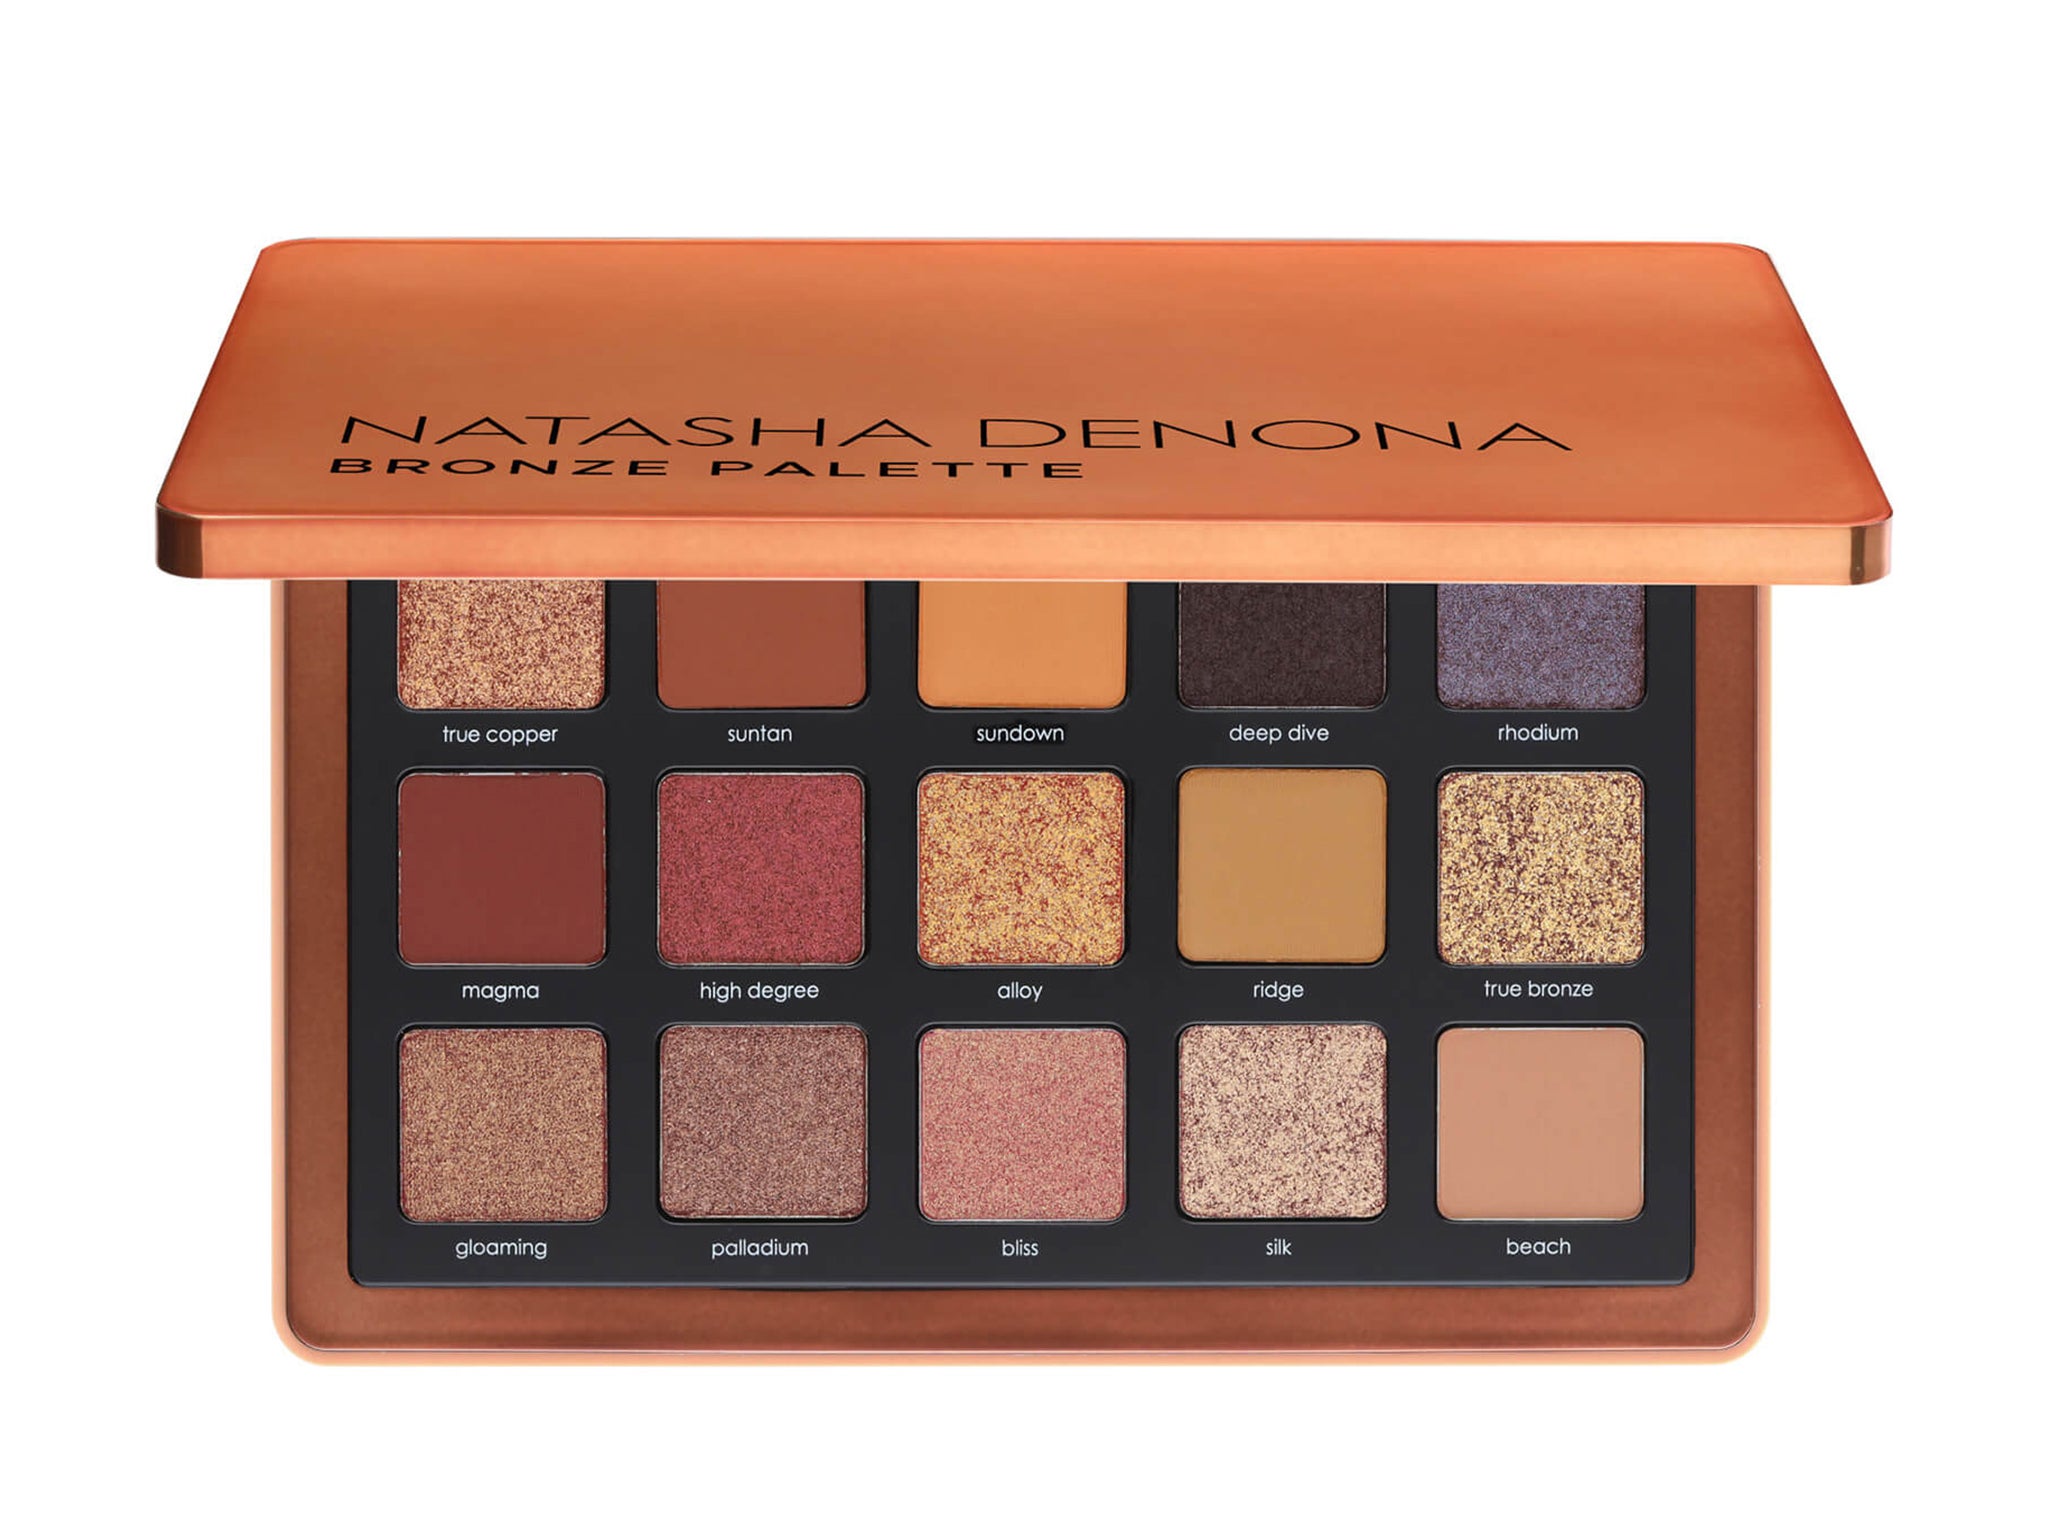 If you’re a fan of warm-toned shimmers, this could be the palette for you